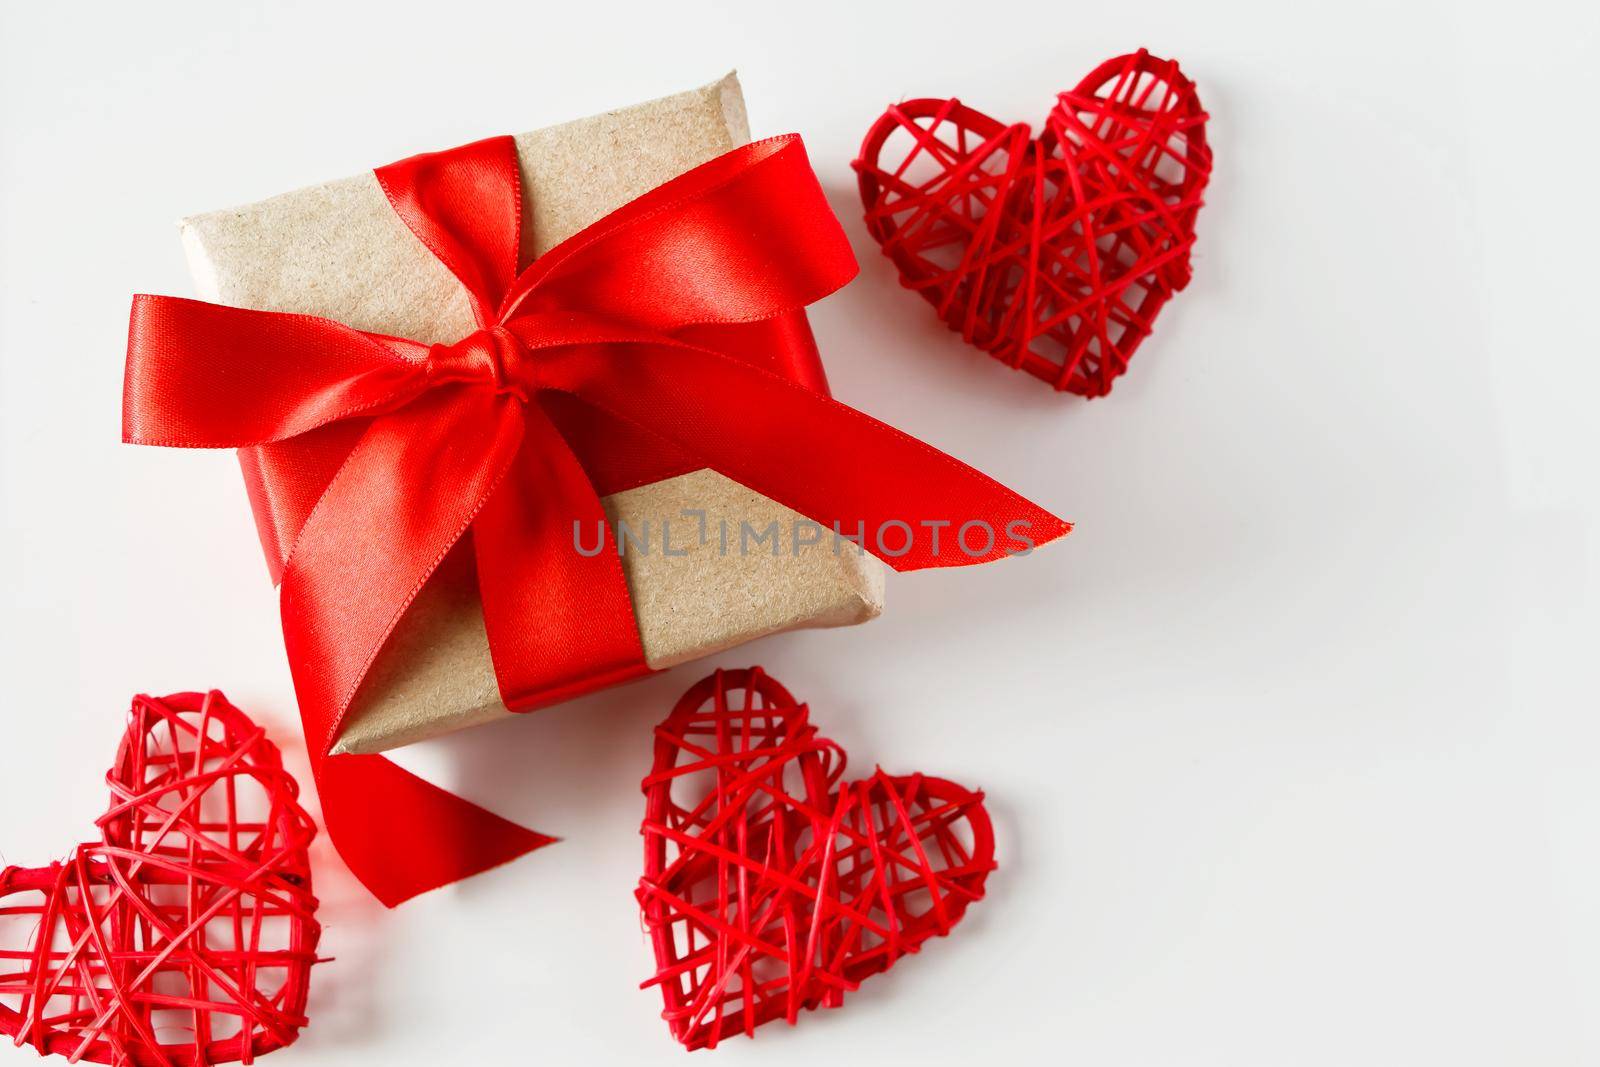 Valentine's day gift and red hearts on a white background. Valentine's day composition - gift with red ribbon and handmade hearts on a white background. Place for your text